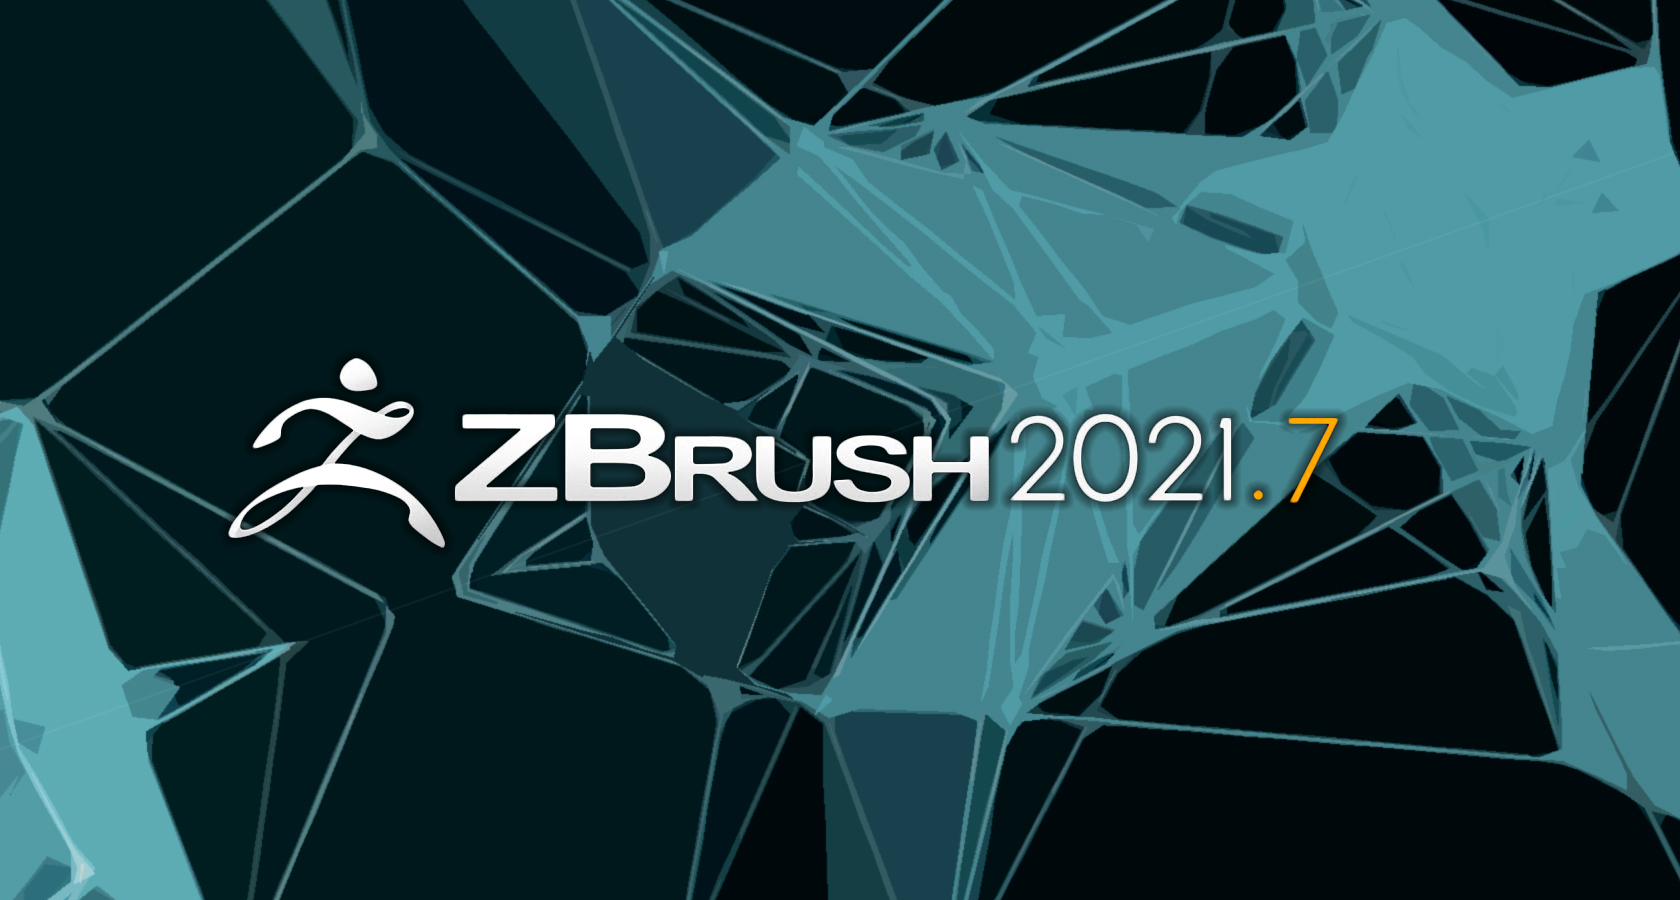 zbrush 2021 new features